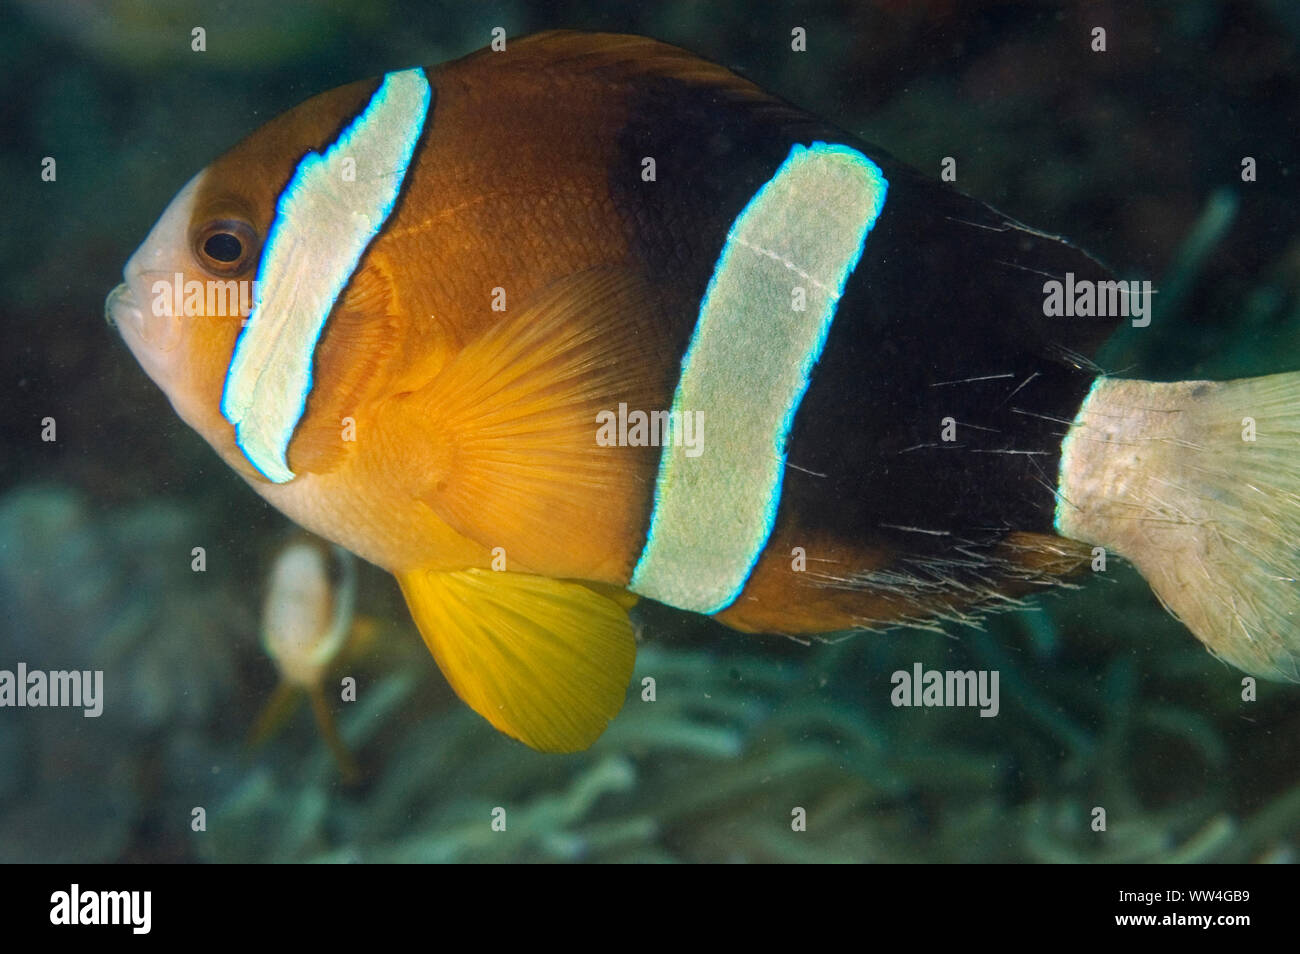 Threeband Anemonefish, Amphiprion tricinctus, with hairs from polychaete worm attack, in Blue-tipped Leathery Sea Anemone, Heteractis crispa Stock Photo